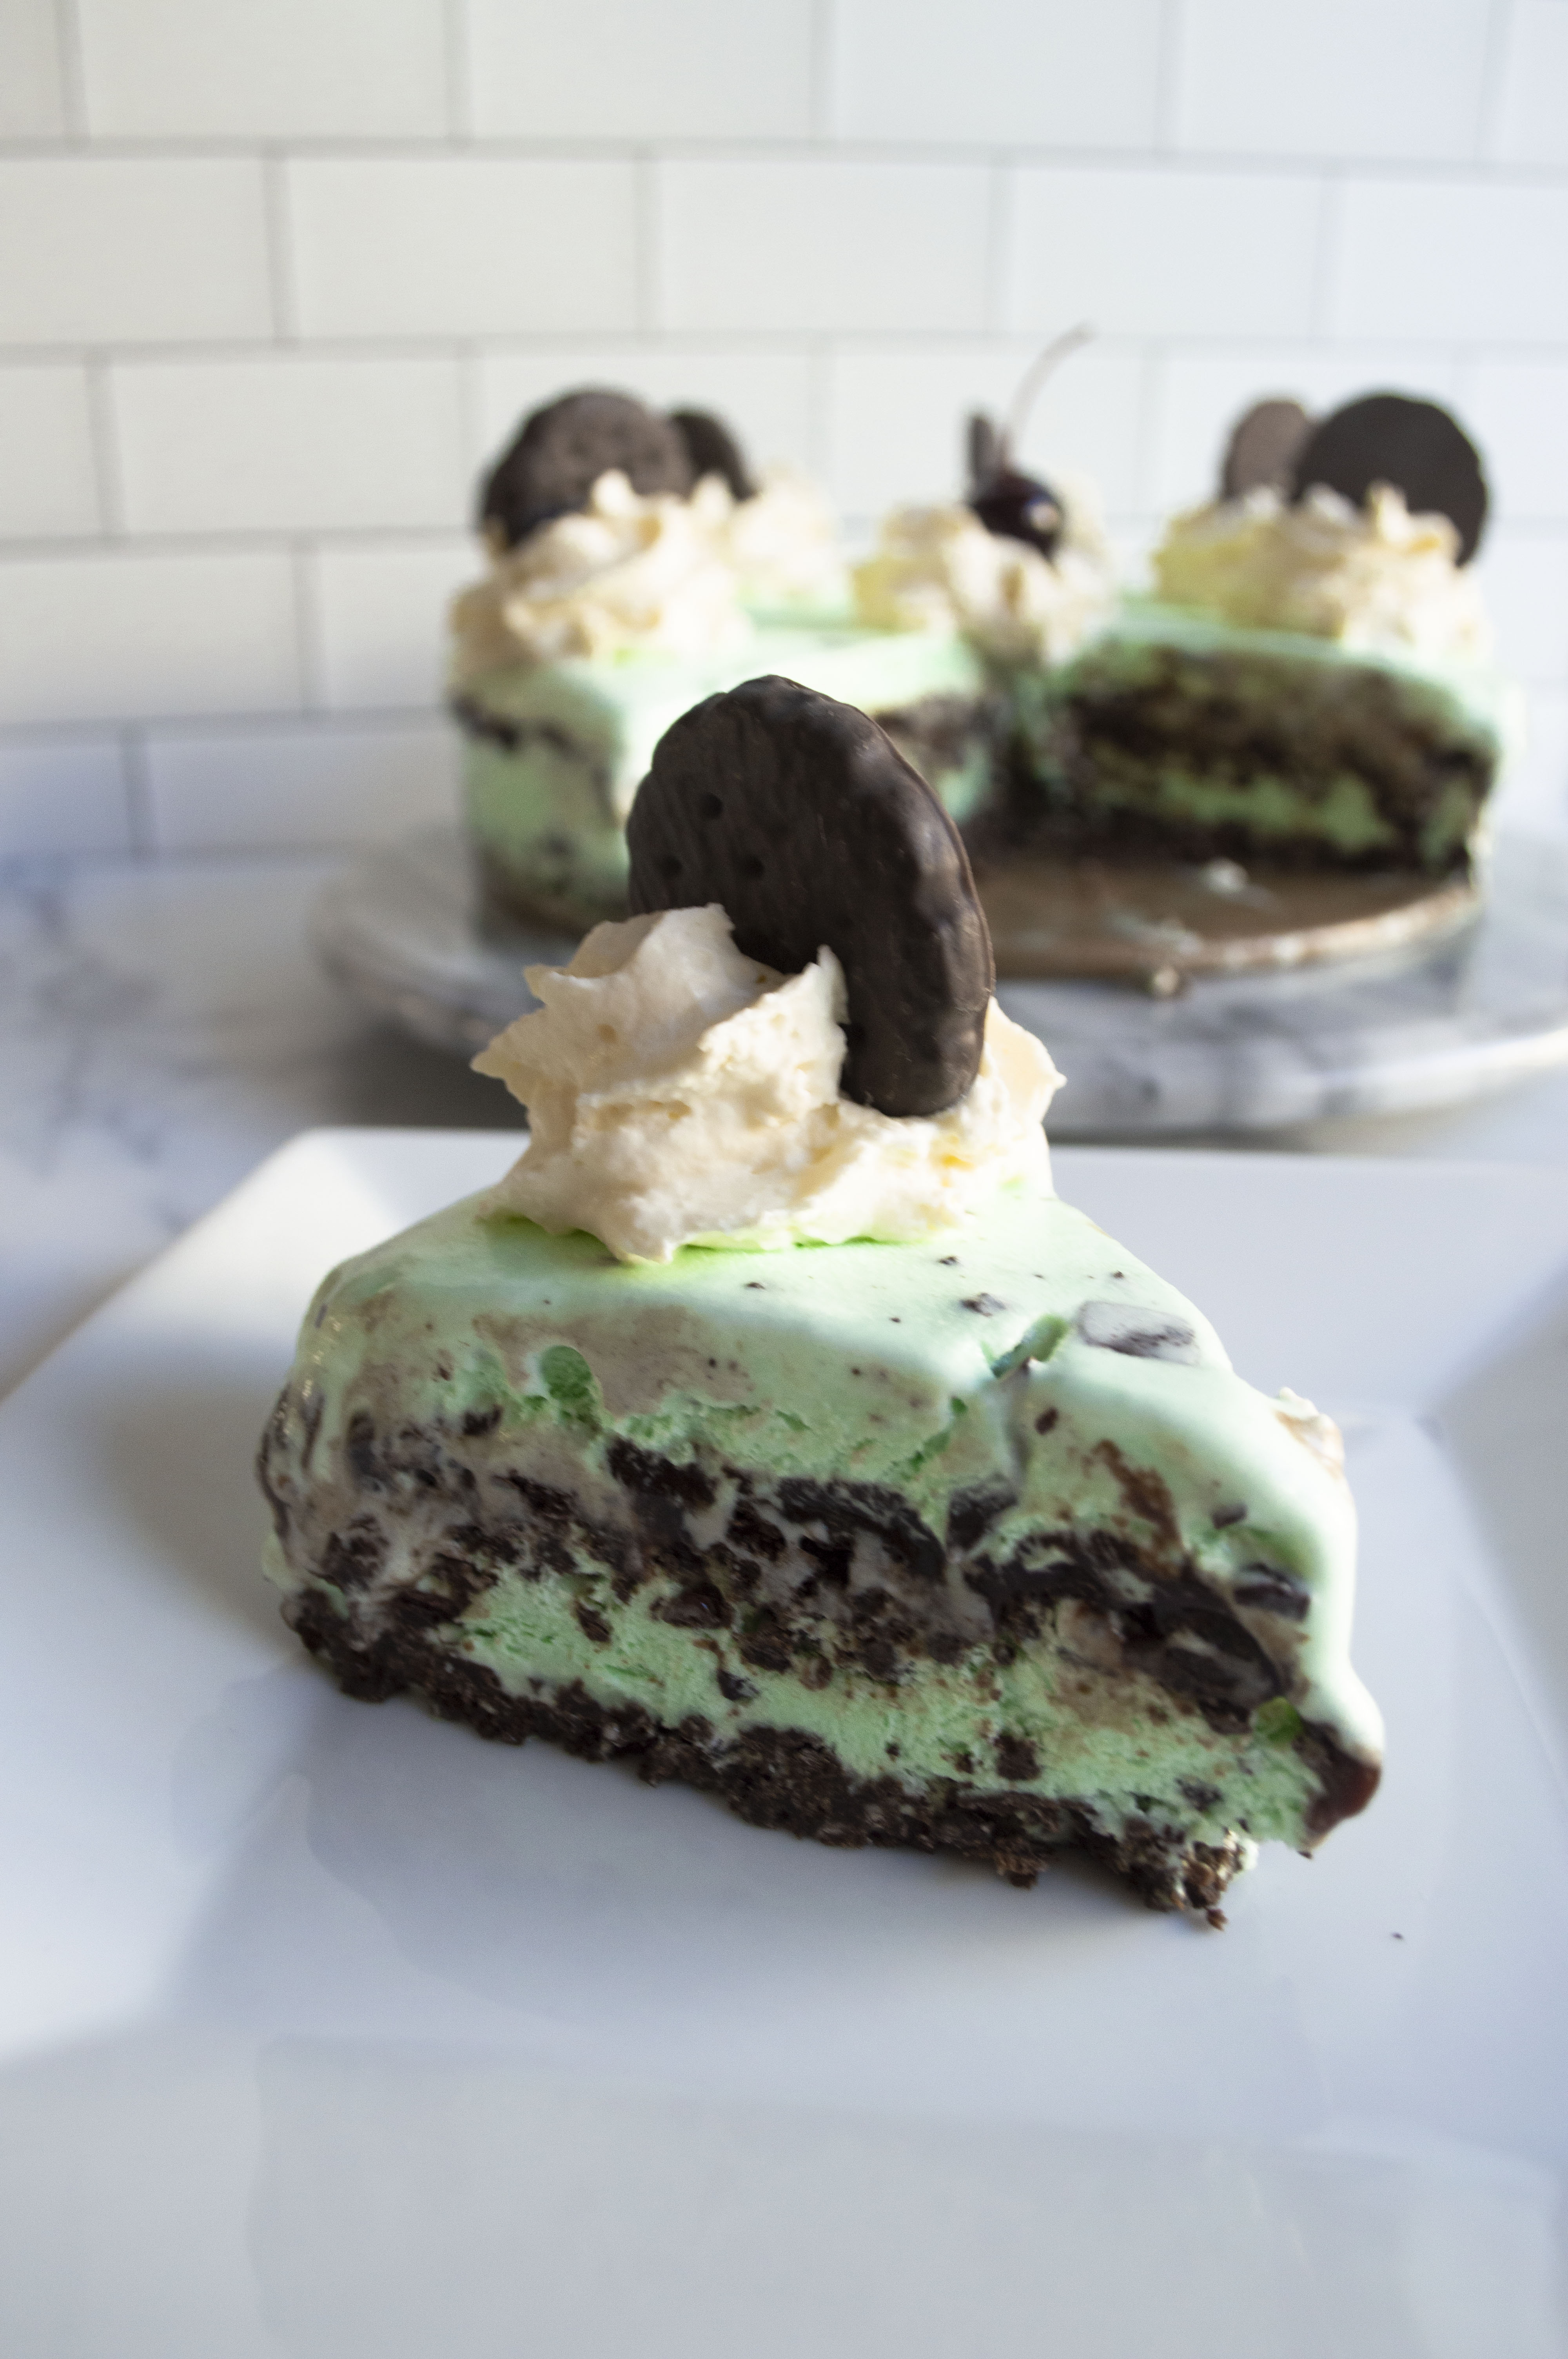 In the foreground sits a melty piece of ice cream cake. It is mint green with layers of cookie crust and fudge layered in, with whipped cream and another thin mint cookie on top. In the background against a subway tile backsplash, you can see the rest of the full cake.